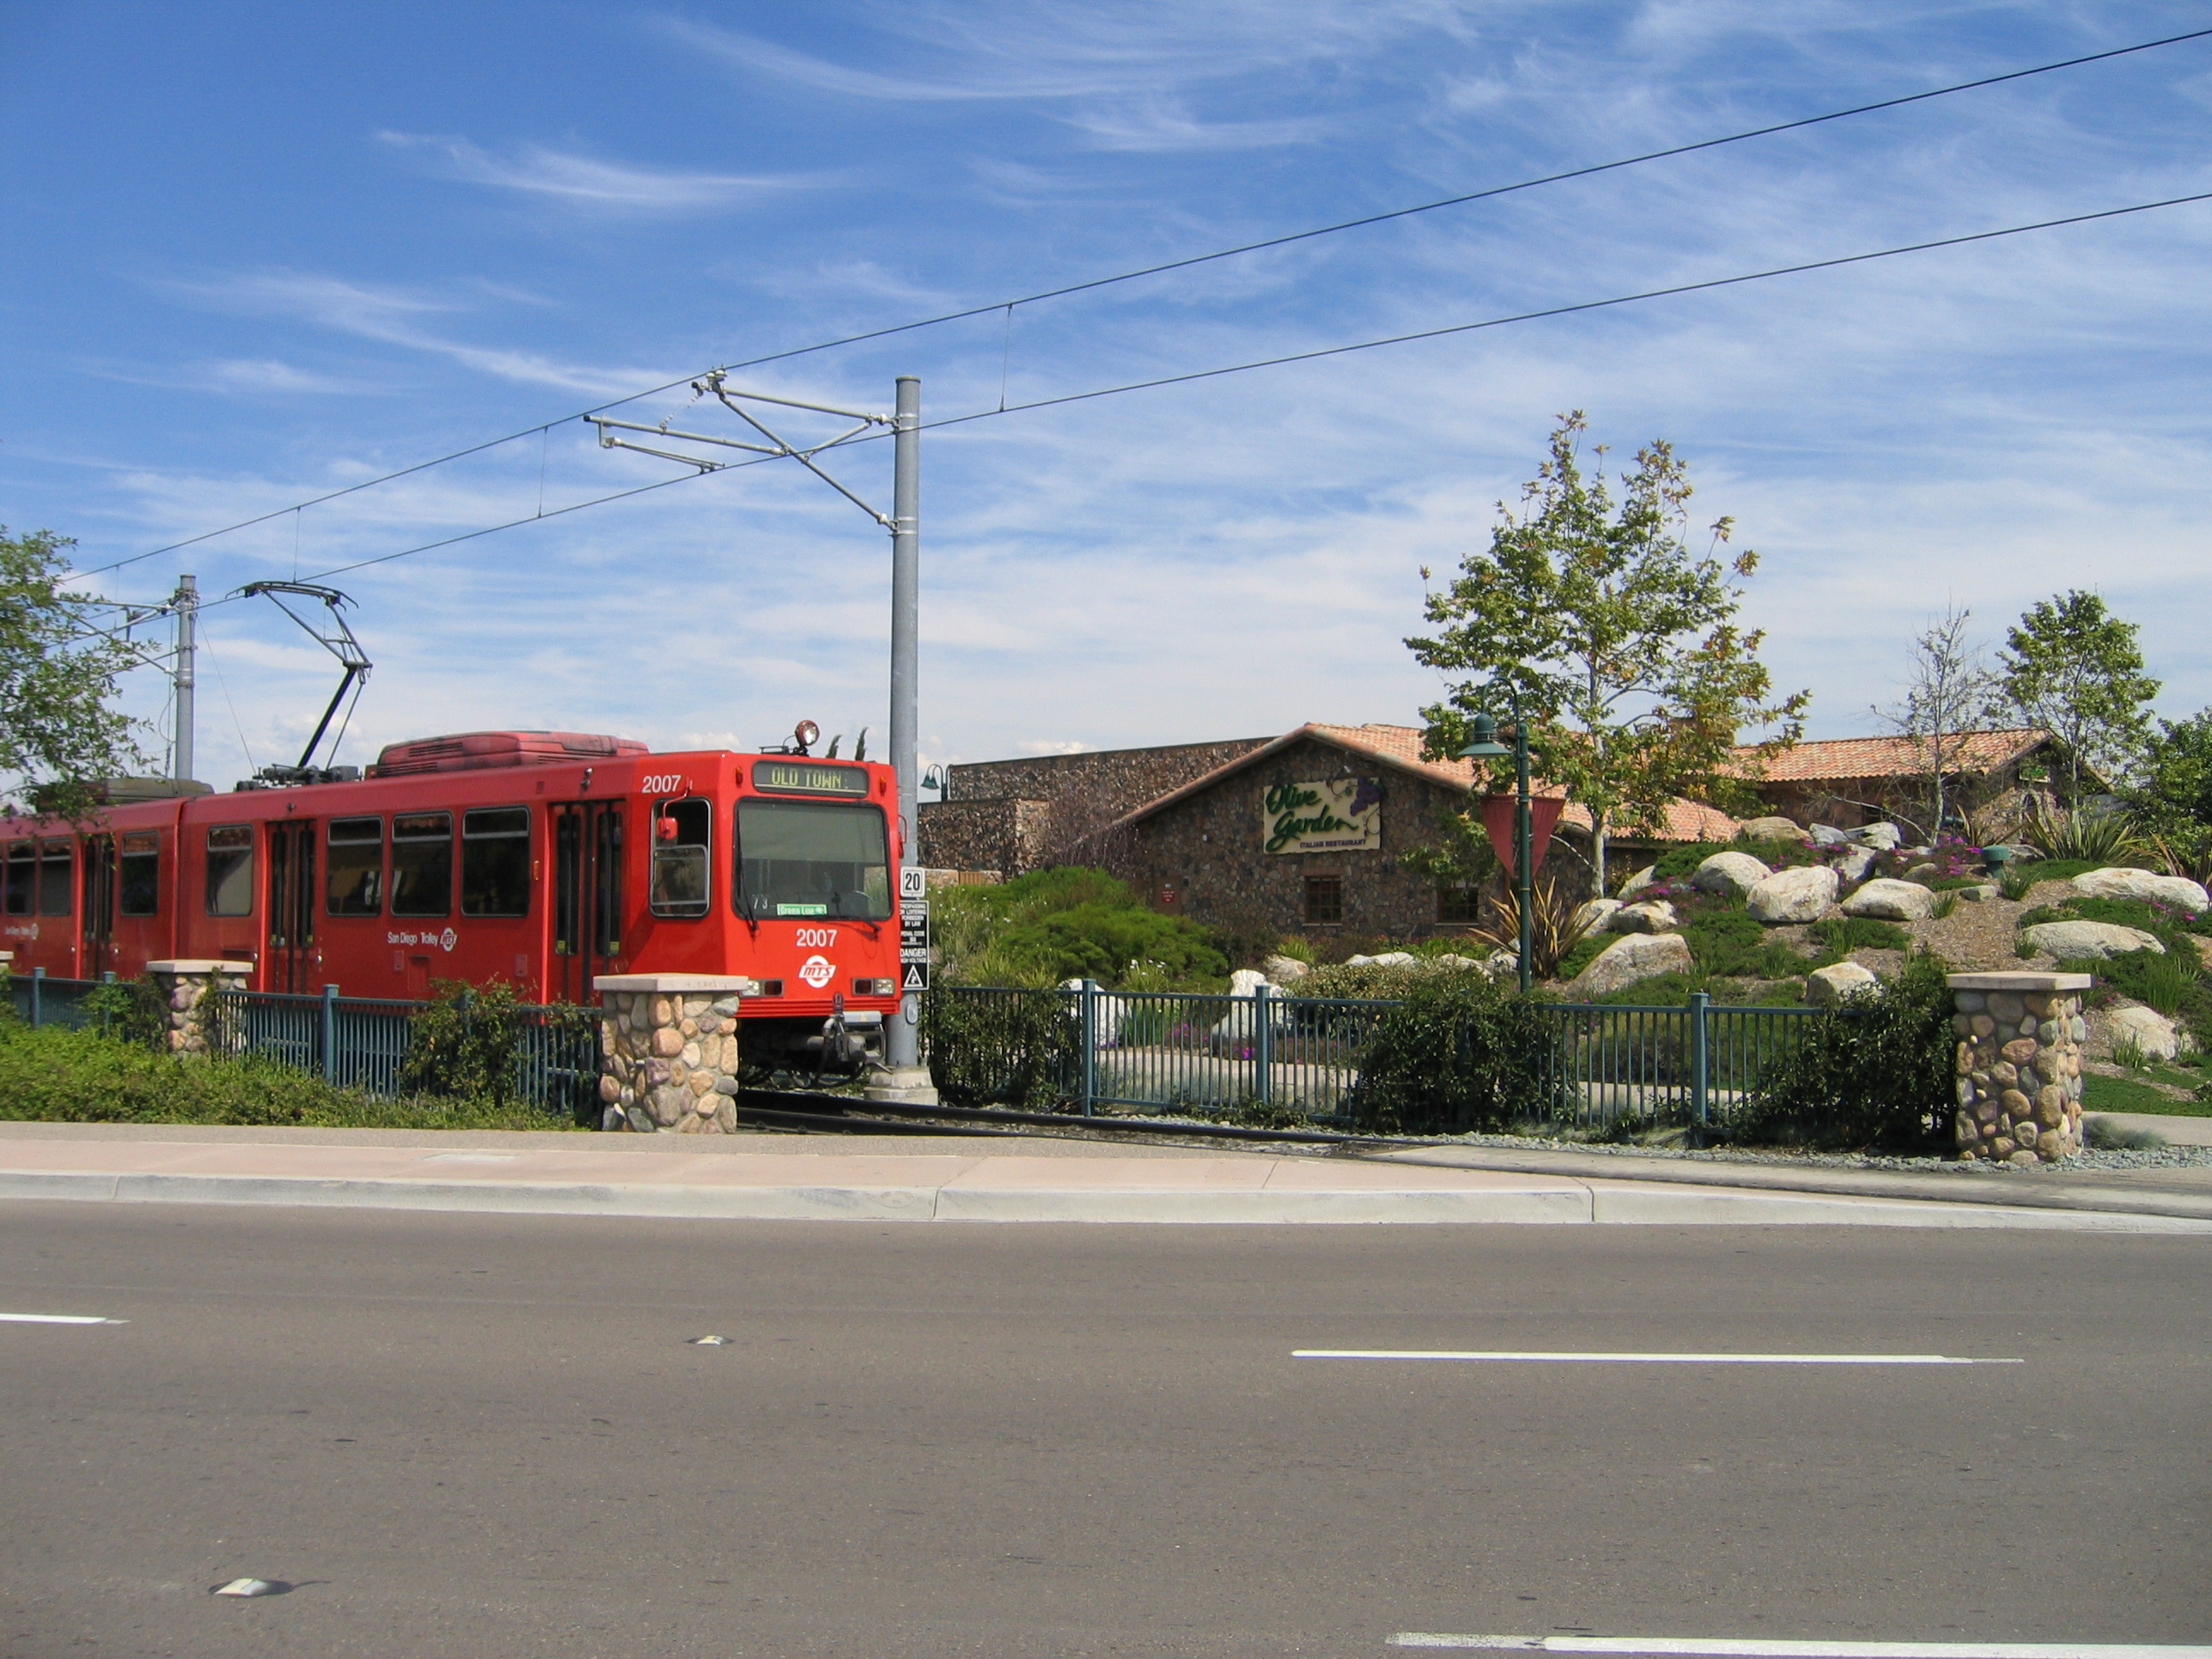 Red trolley at Santee Trolley Square